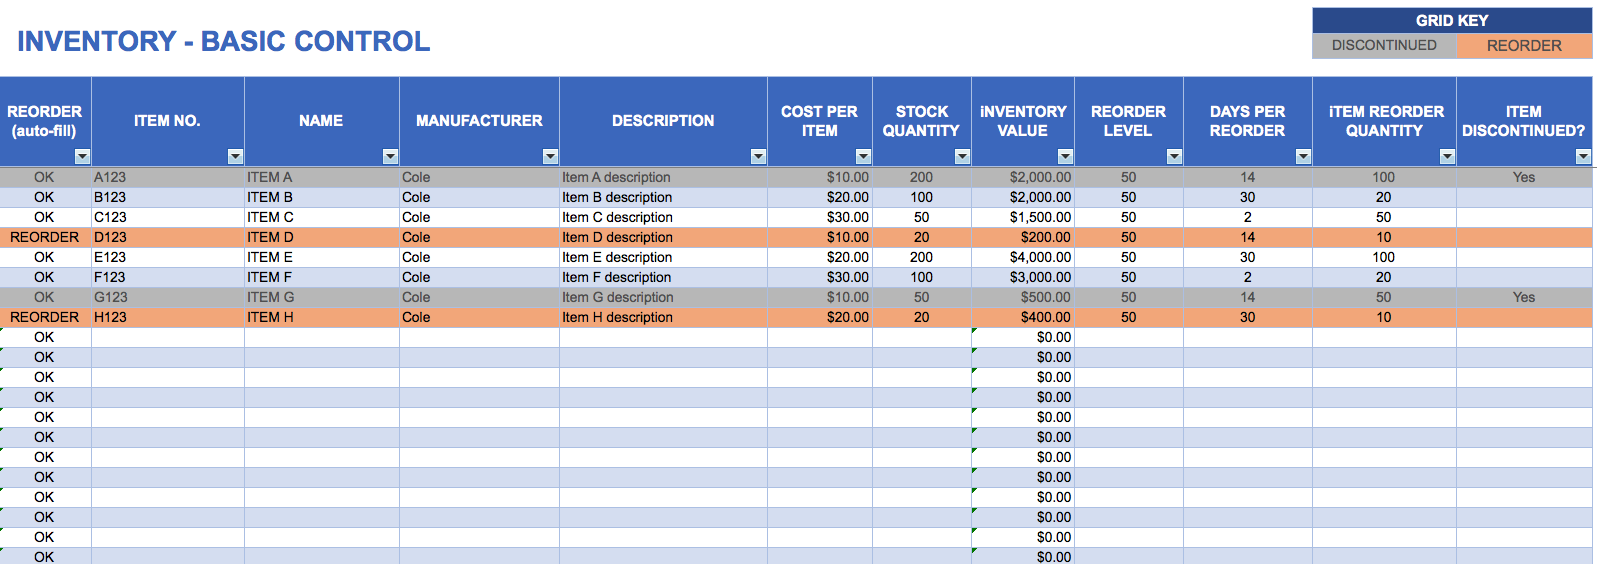 inventory-template-excel-charlotte-clergy-coalition